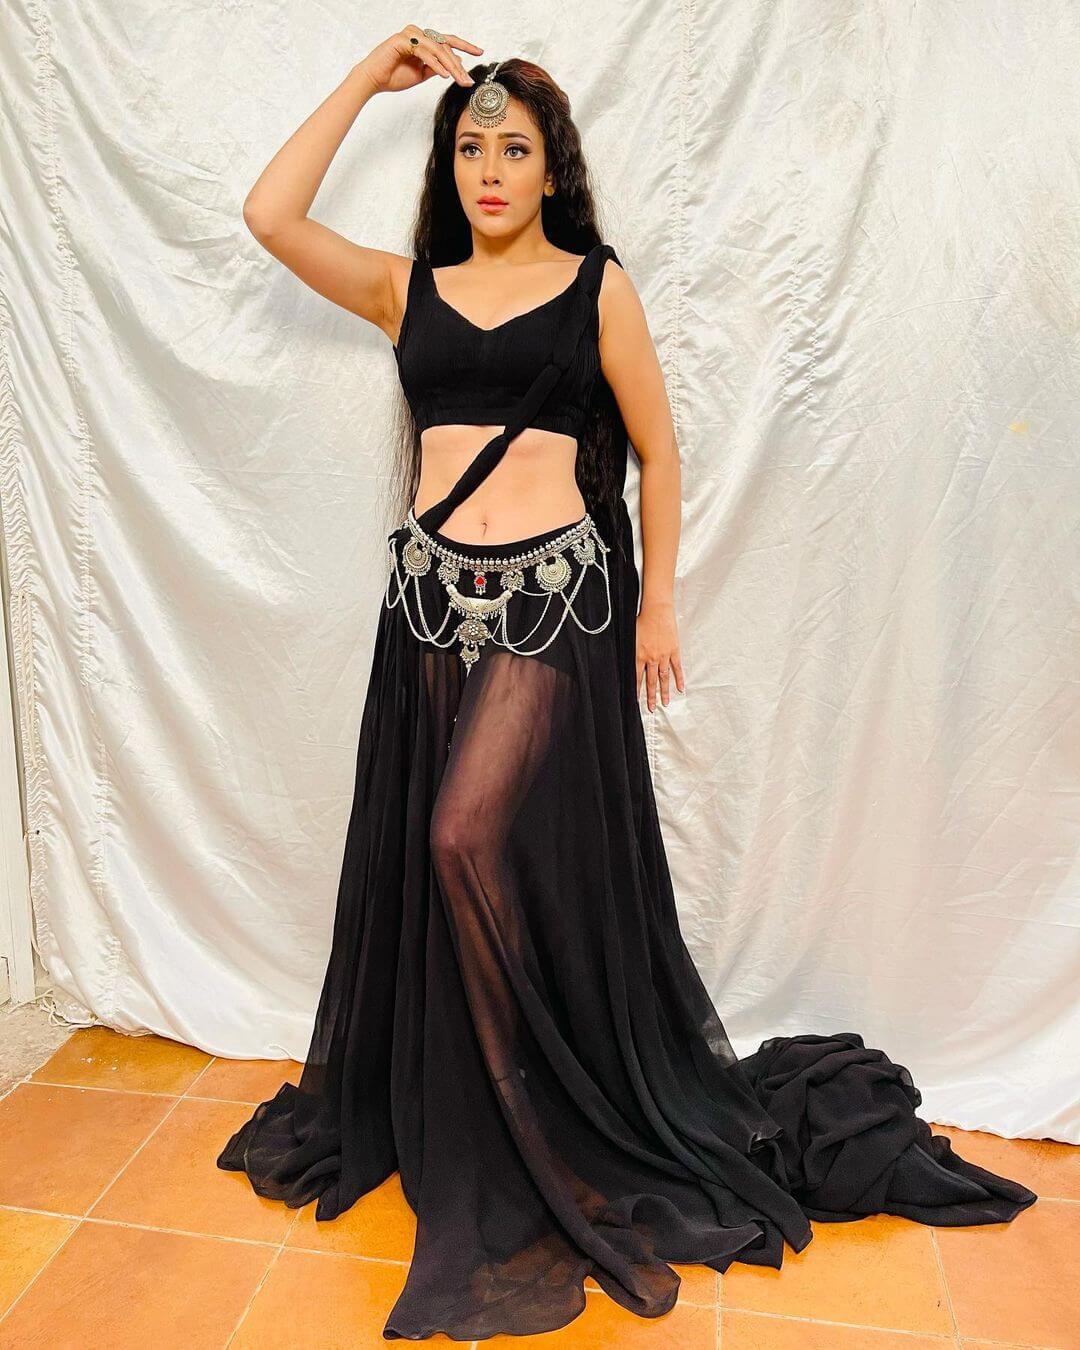 Hot Babe Hiba Nawab In Black Outfit Hiba Nawab Stunning Looks And Outfit